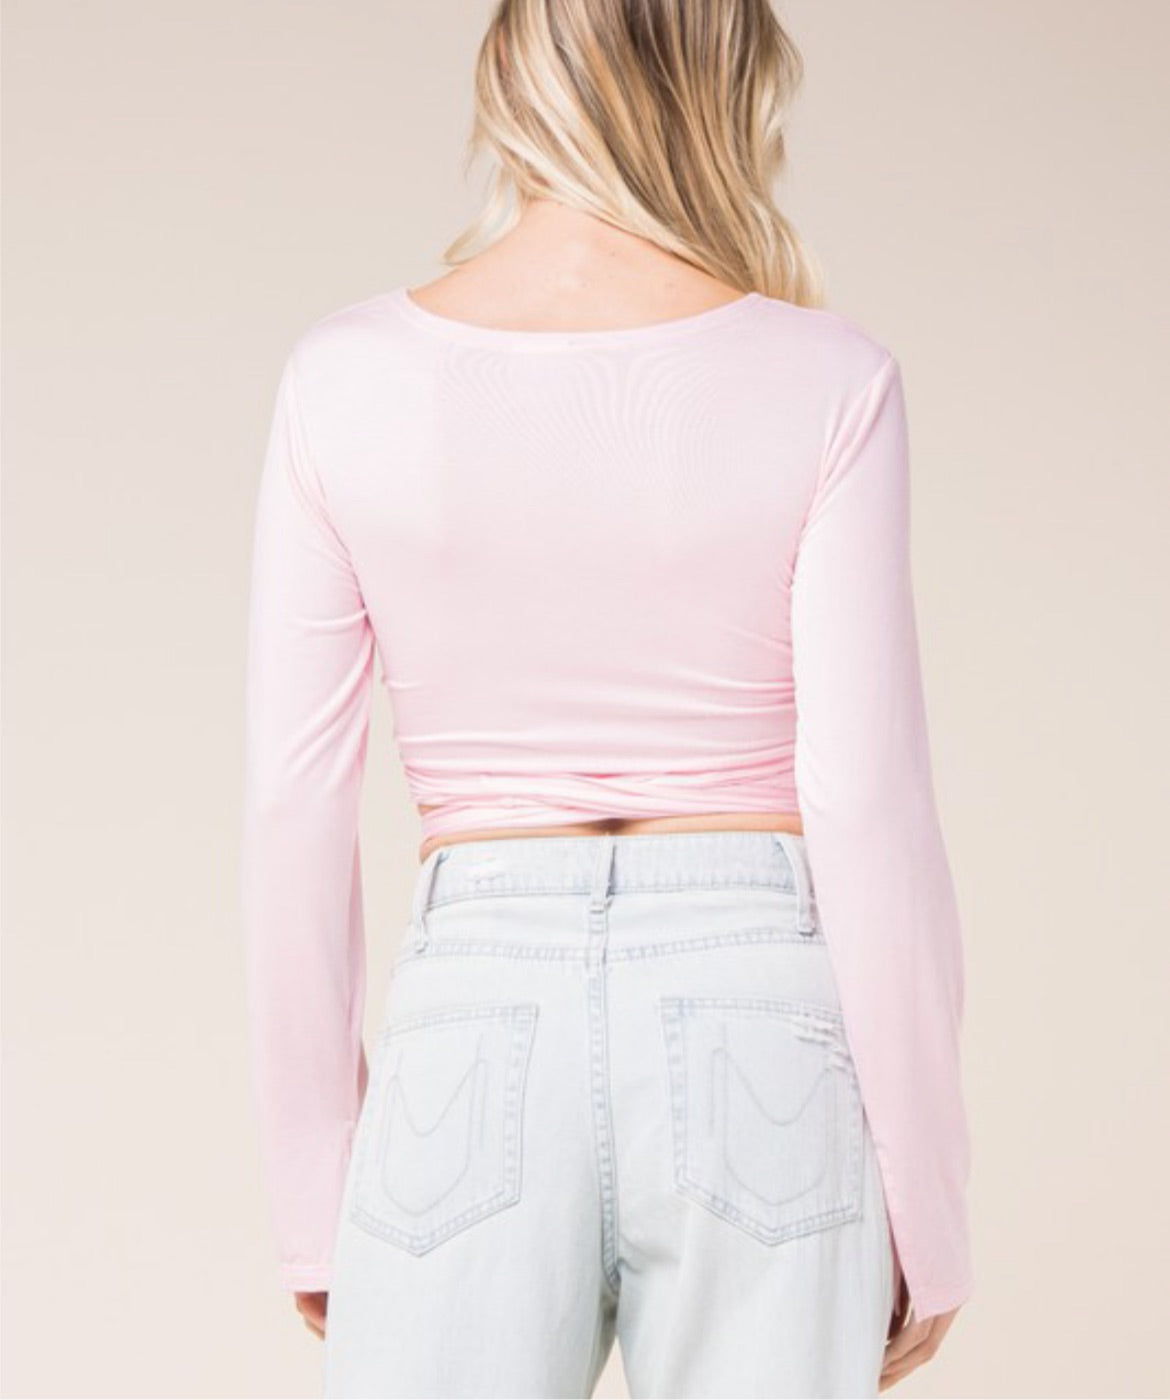 Baby Pink Wrap Around Top